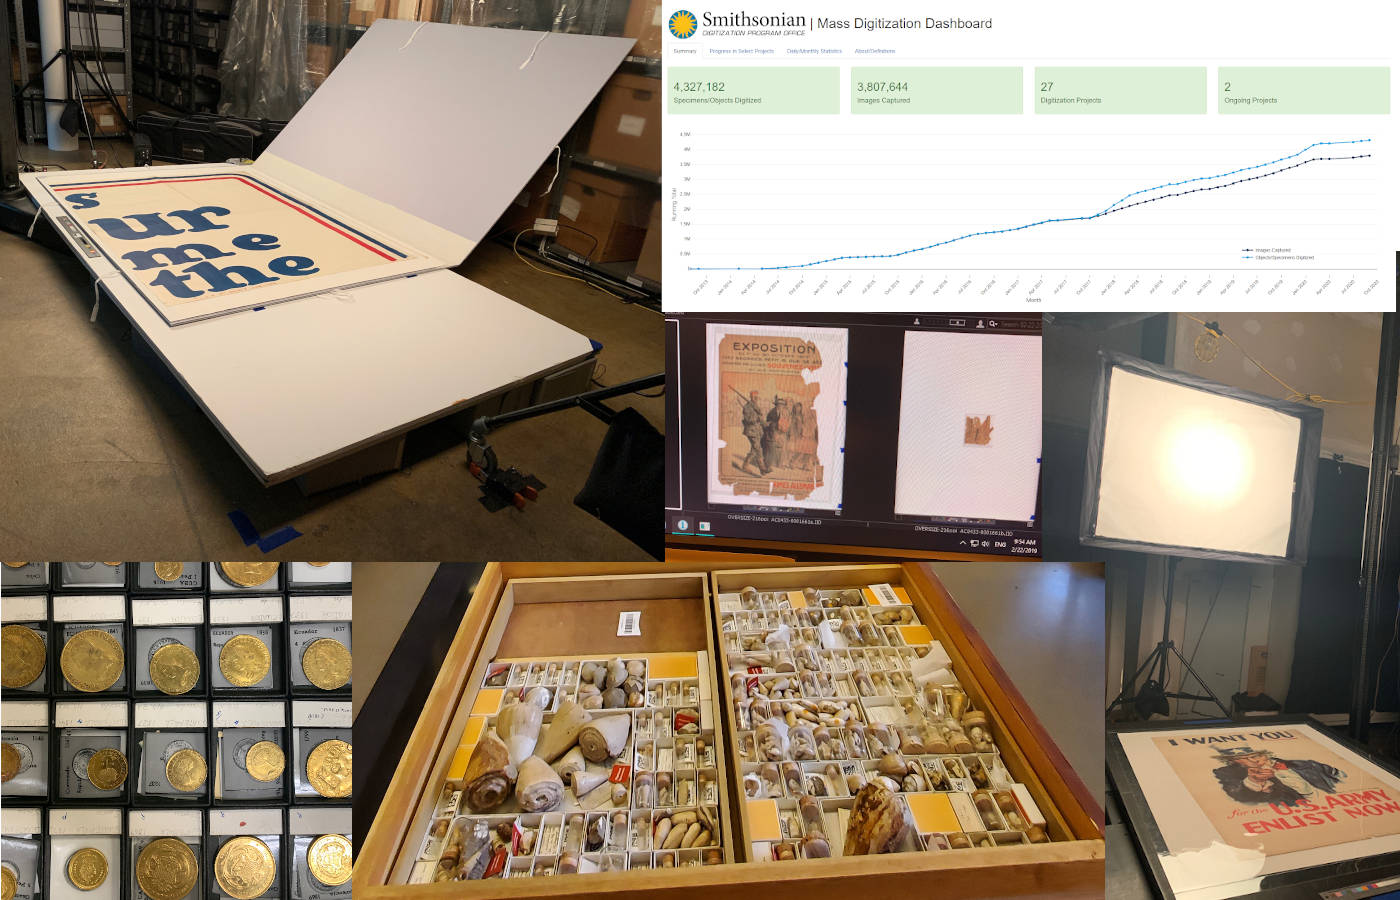 Objects and Dashboard from Mass Digitization